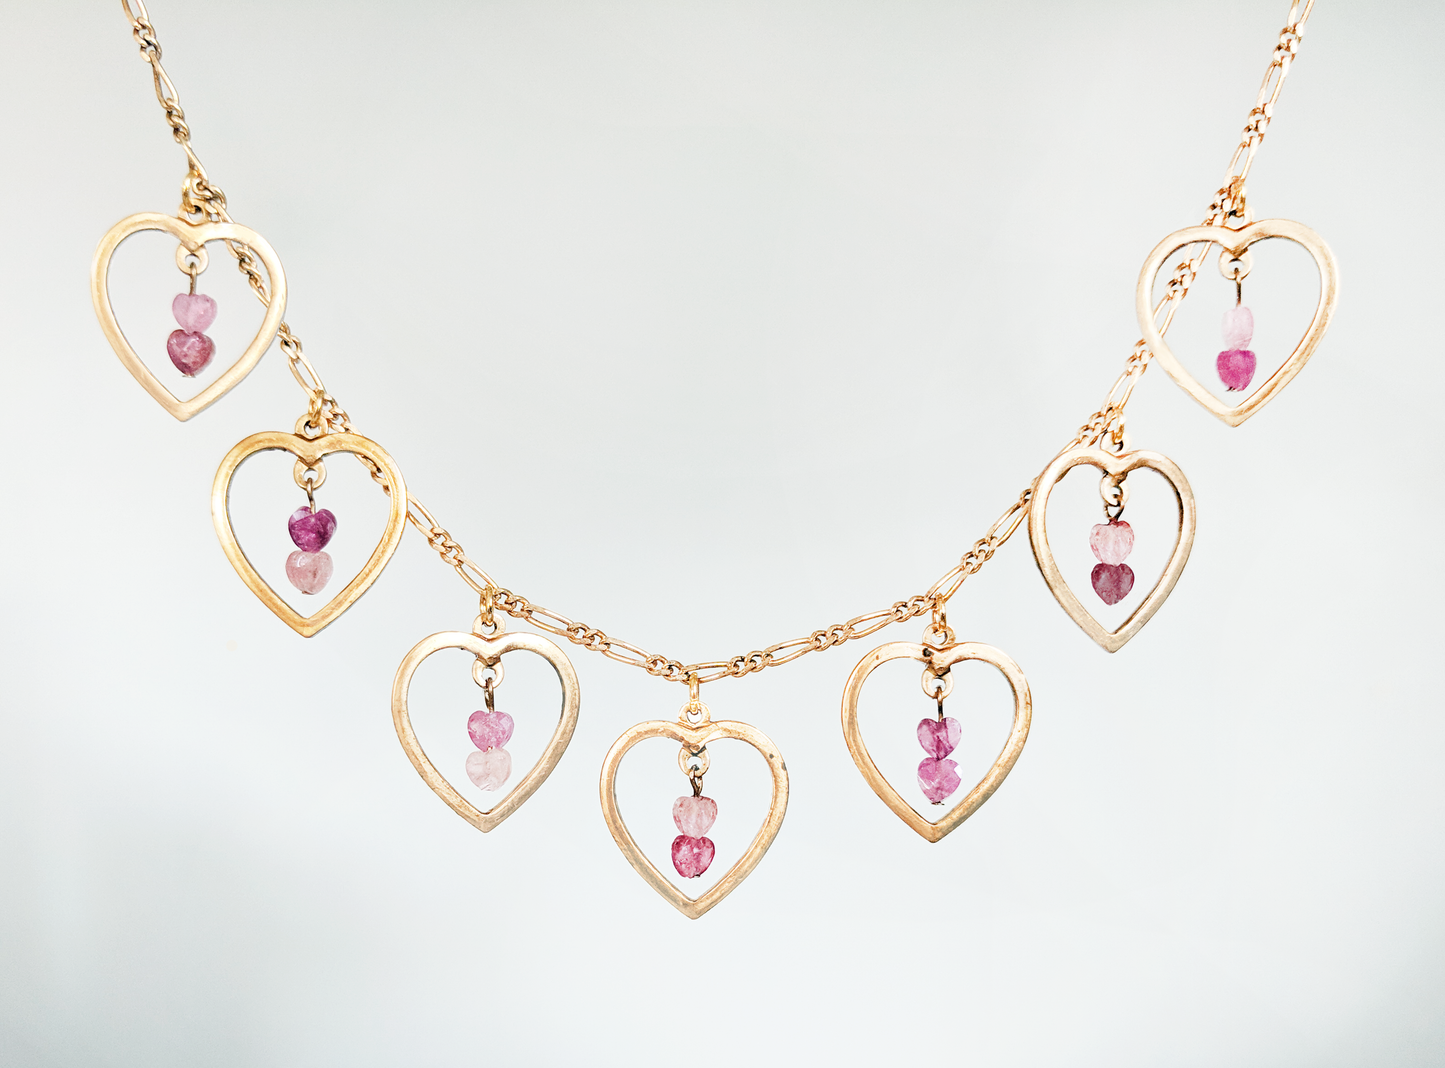 Hearts in Hearts Necklace